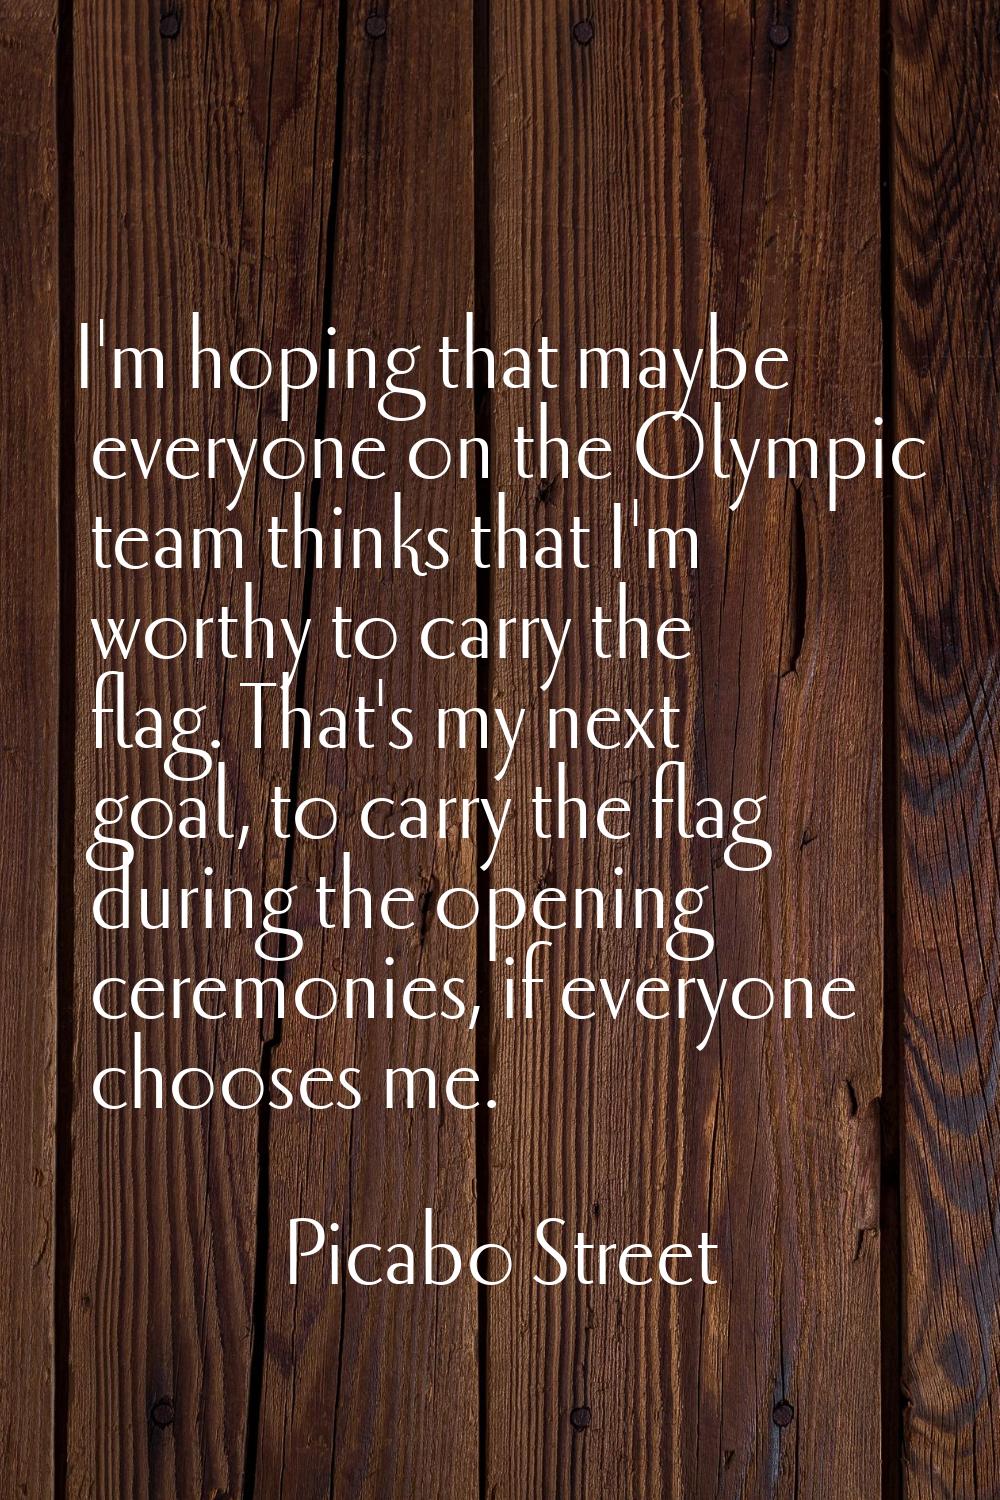 I'm hoping that maybe everyone on the Olympic team thinks that I'm worthy to carry the flag. That's